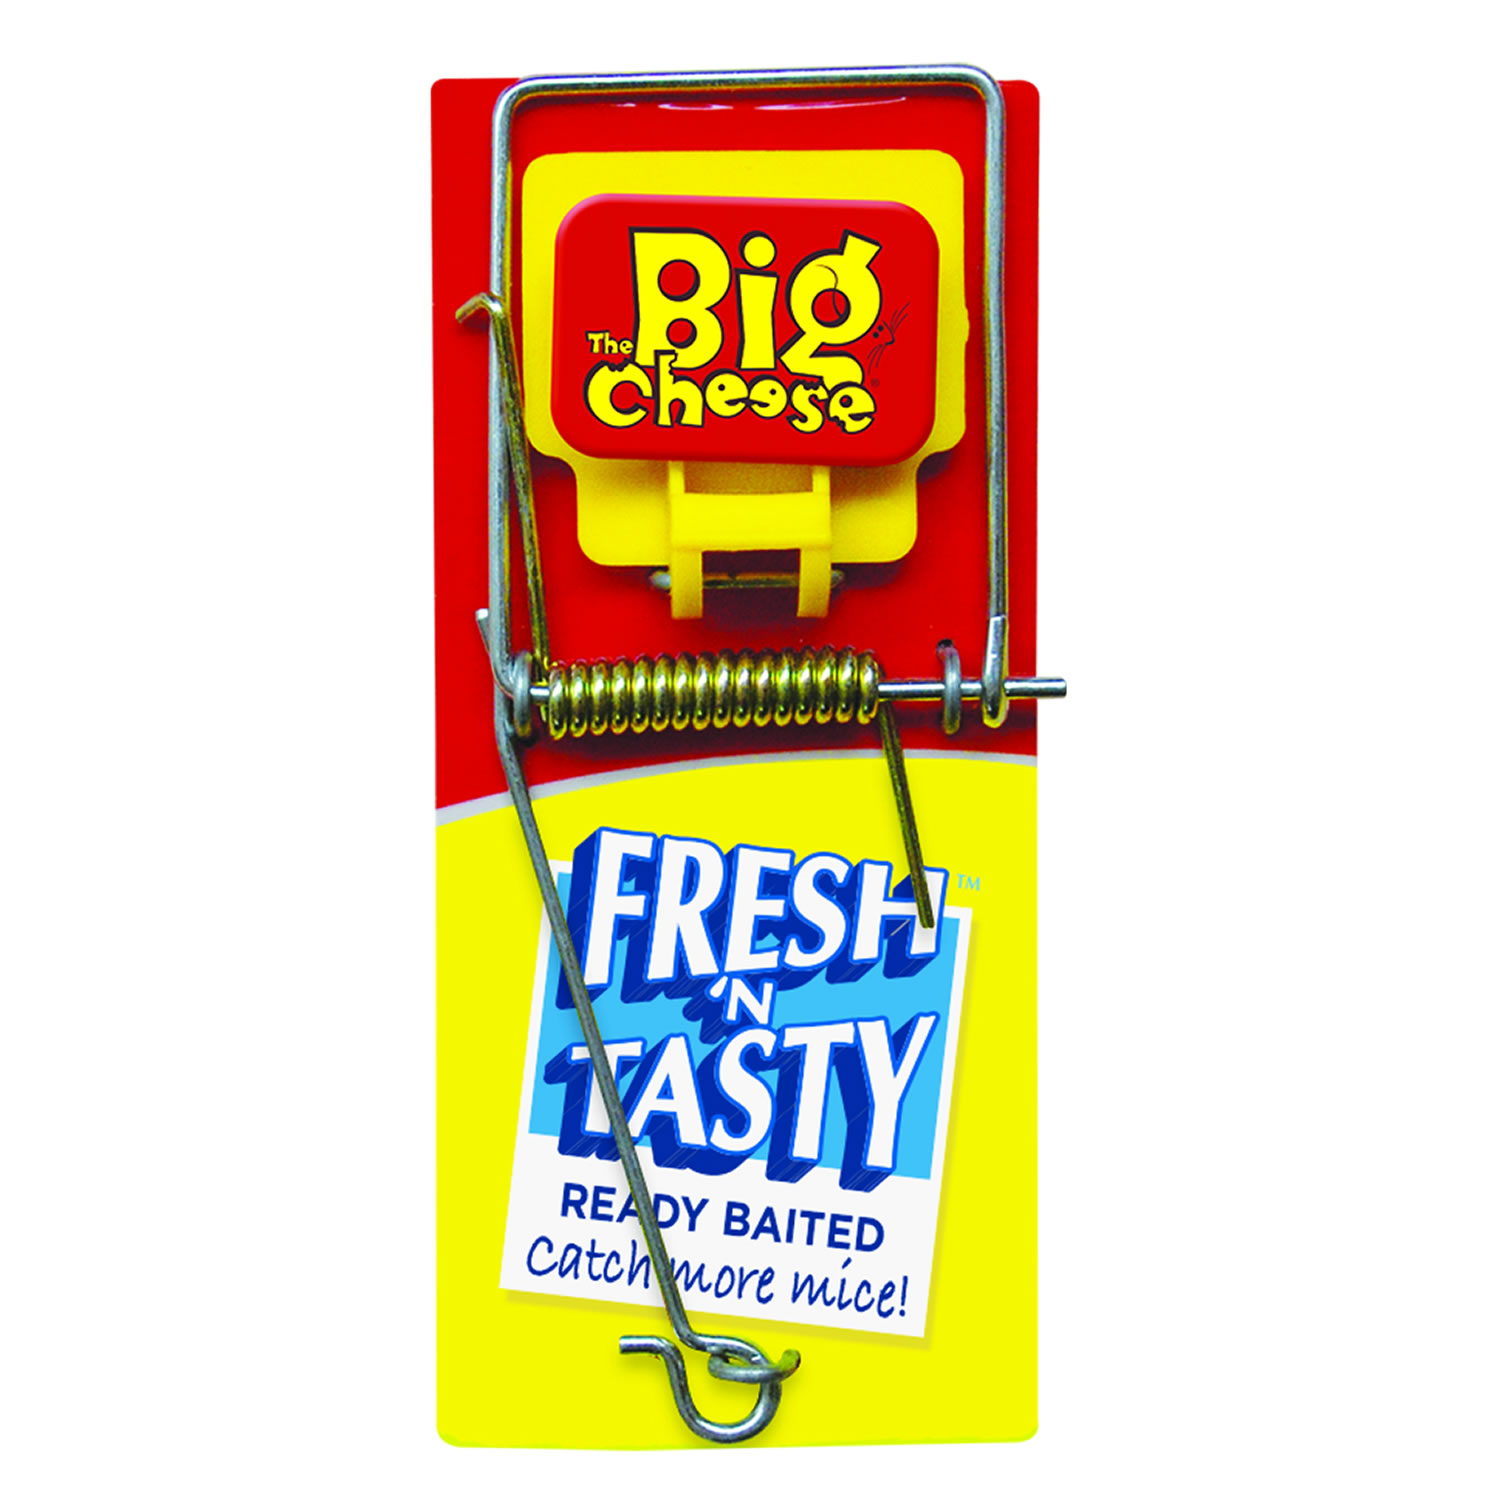 THE BIG CHEESE FRESH N TASTY BAITED MOUSE TRAP 30 PACK